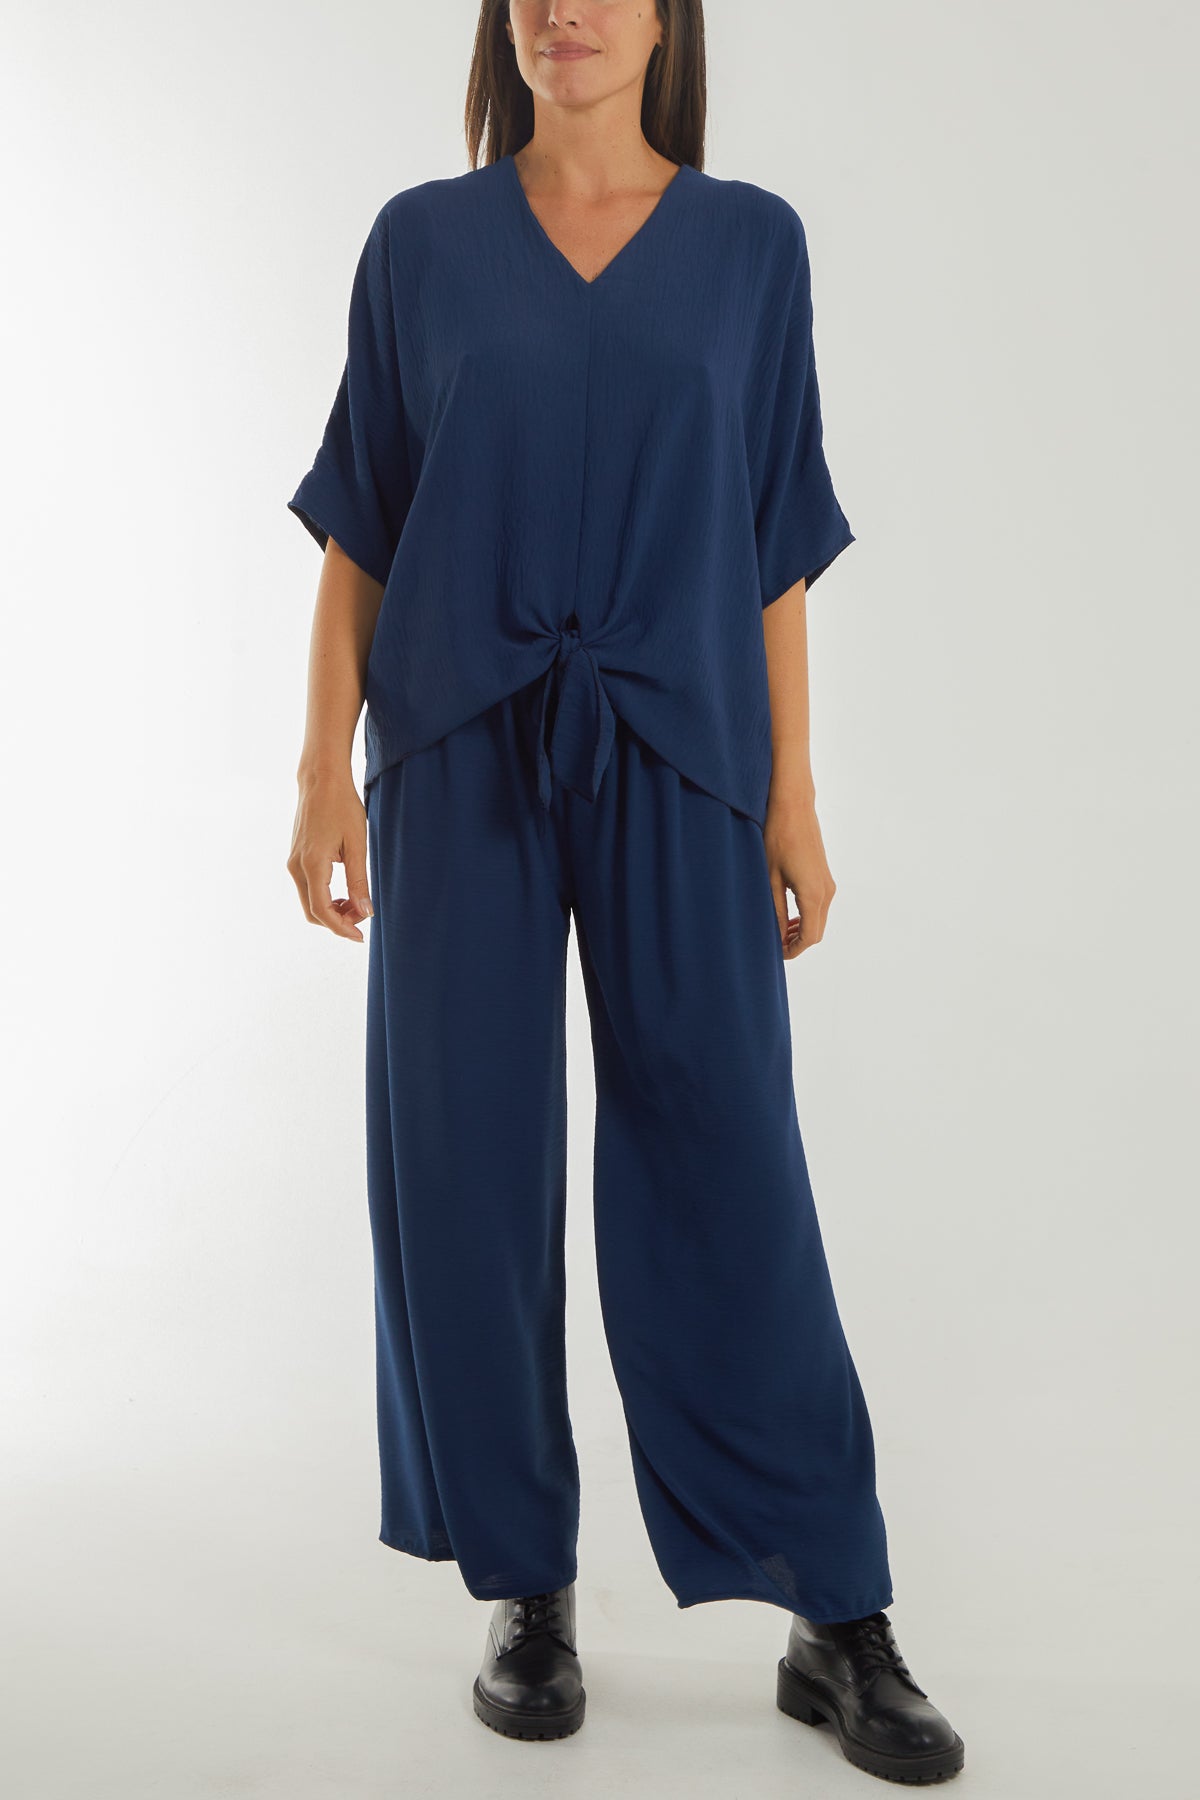 Knotted Front Top & Culottes Co-Ord Set